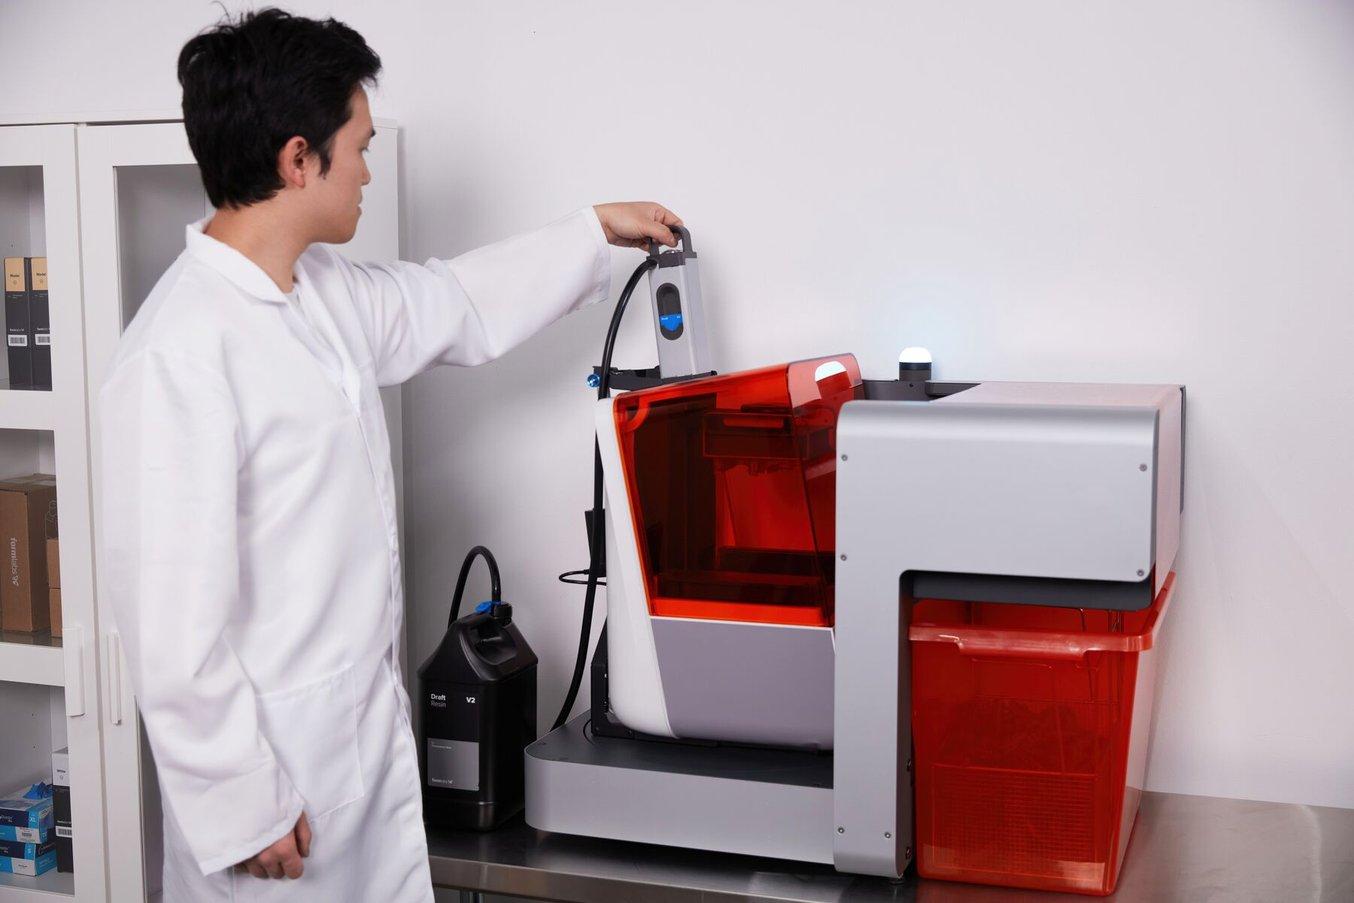 Person in lab coat inserting a Resin Pump into a Formlabs 3B+ 3D printer